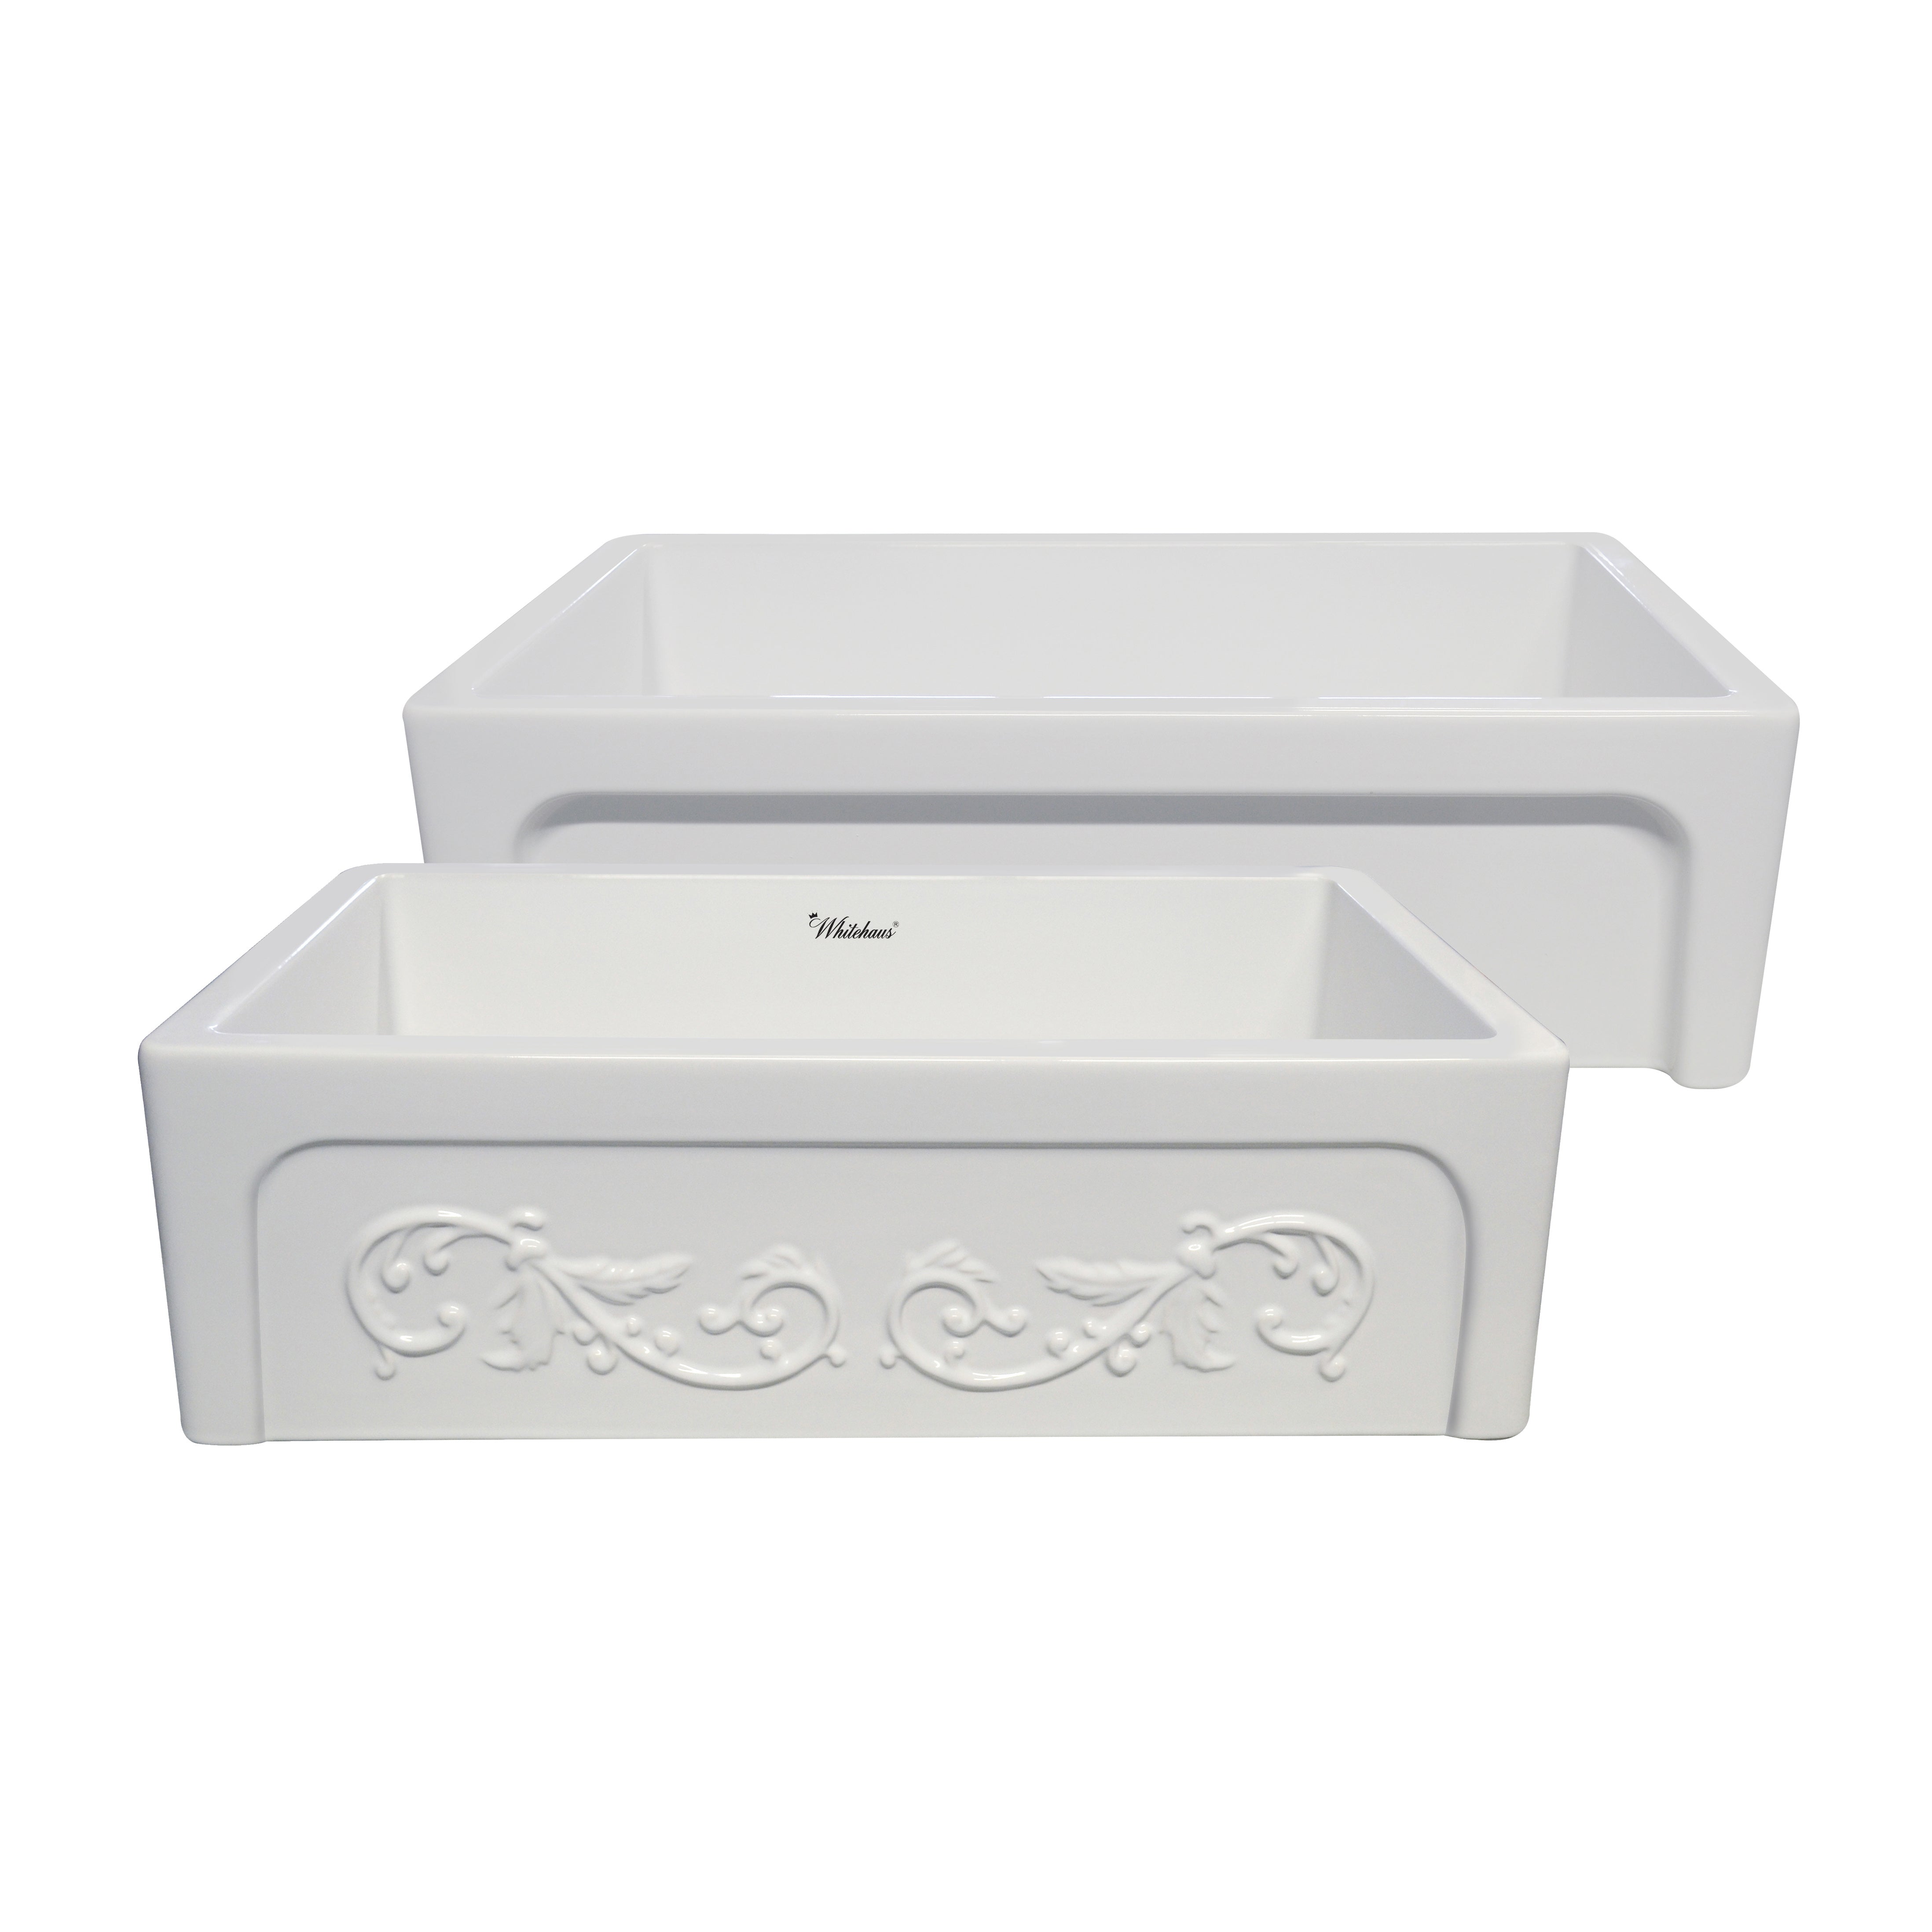 Whitehaus Glencove St. Ives 33" Front Apron Fireclay Sink